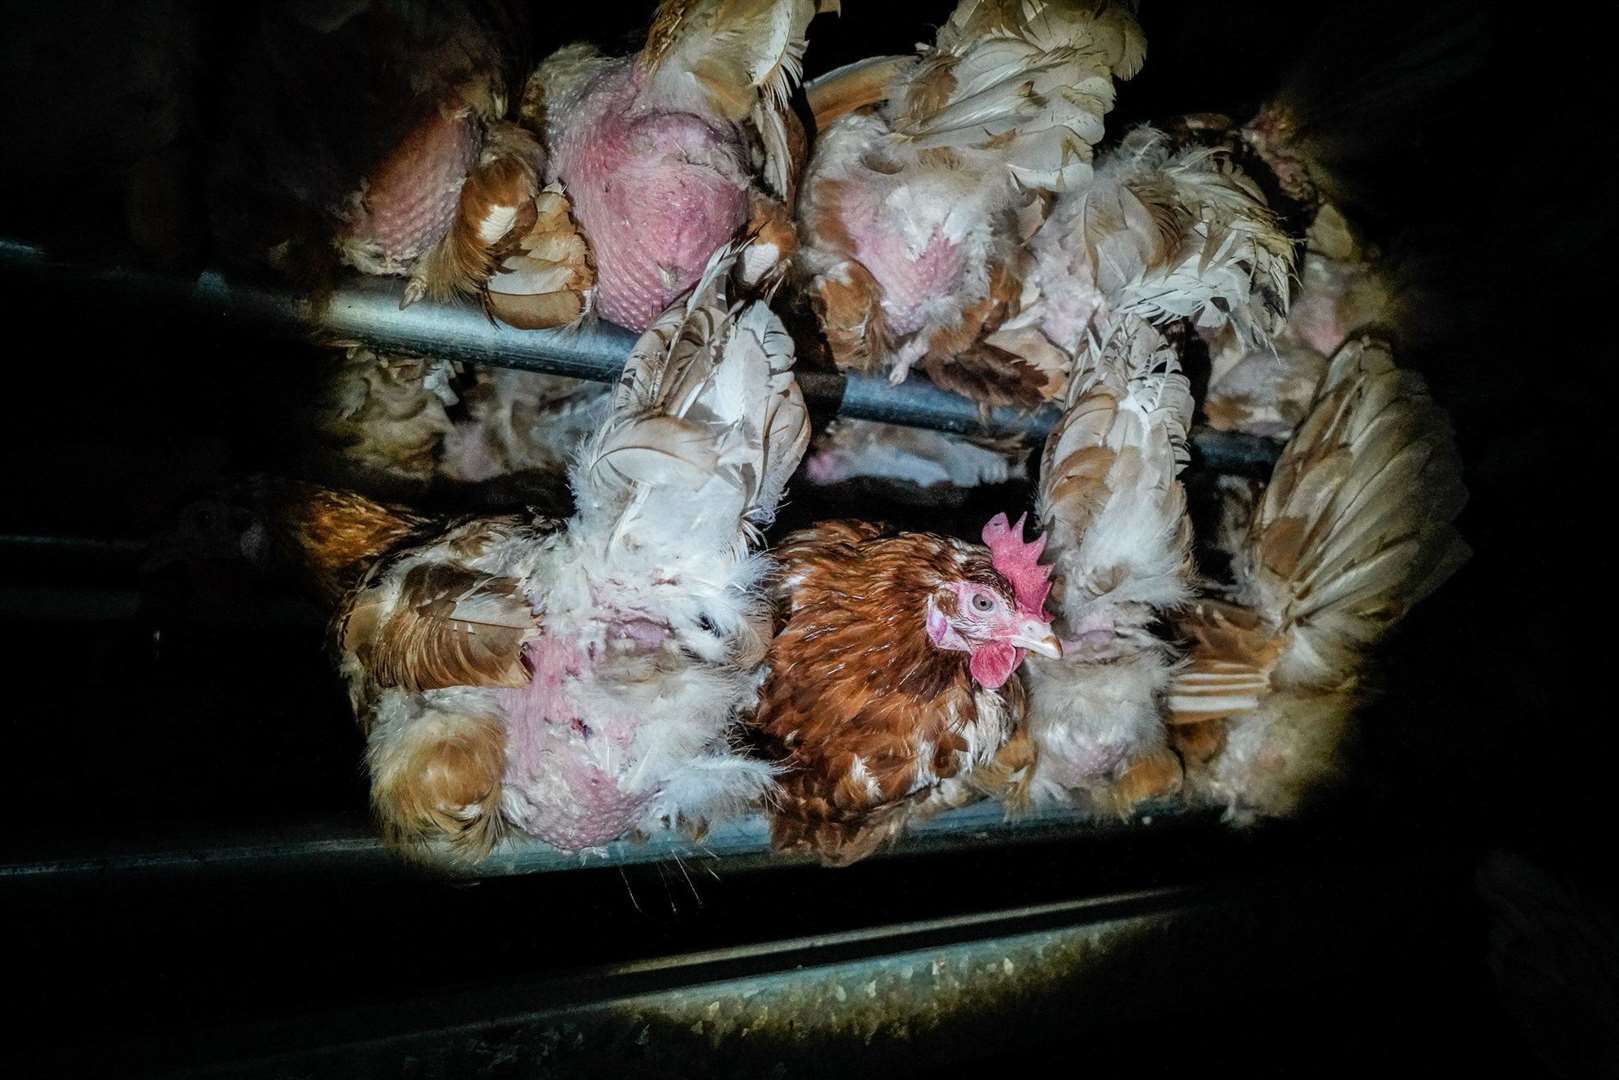 Tesco And Sainsburys In Kent Pull Eggs From Shelves After Shocking Footage Shows Dead Hens At 